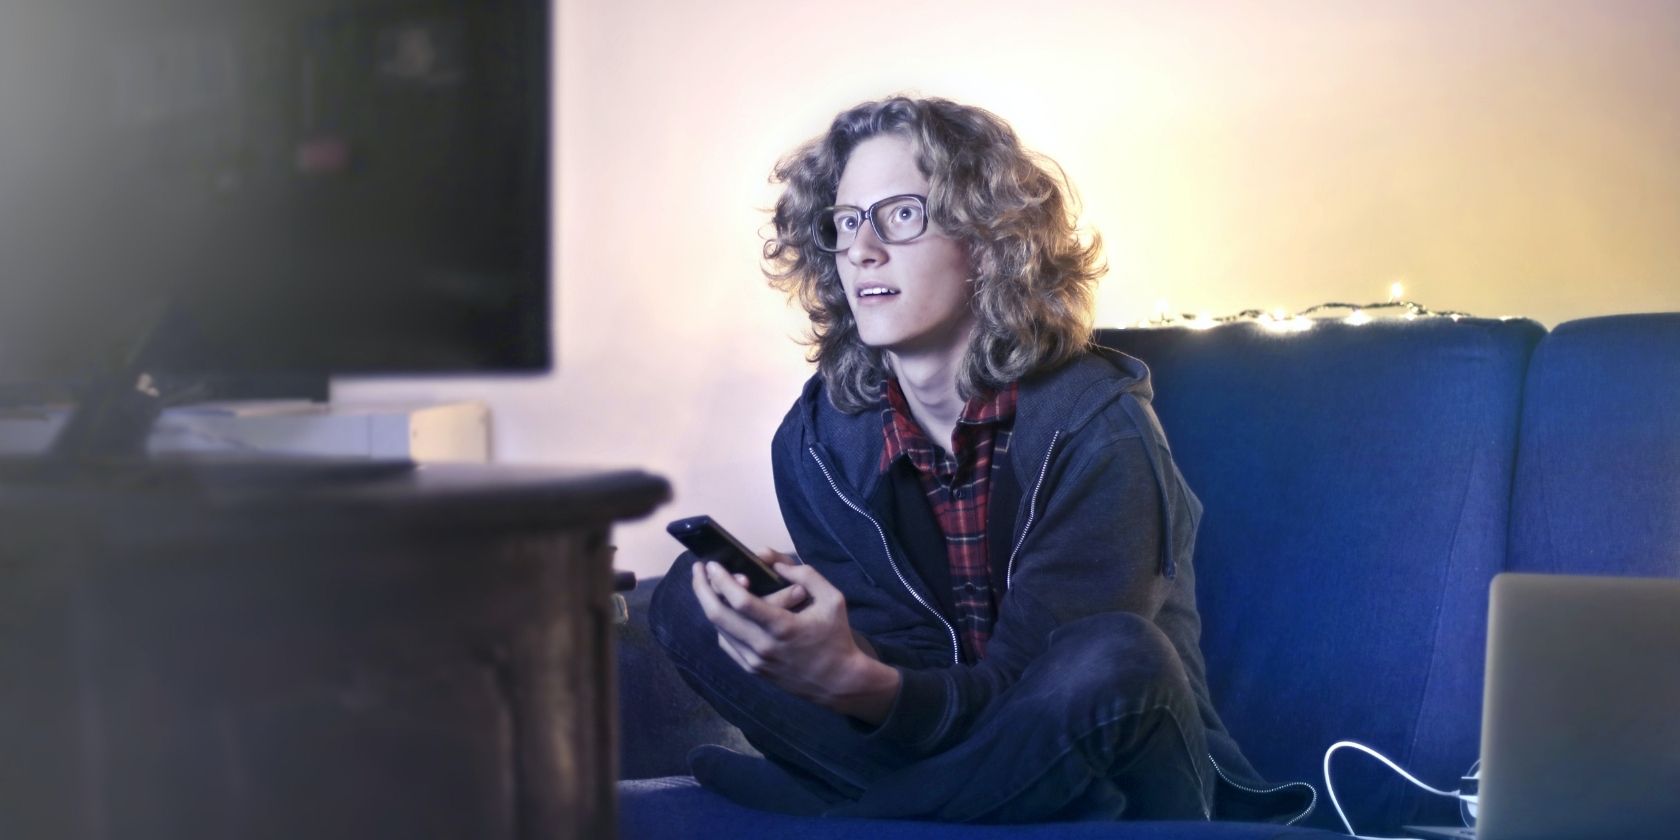 Person with Glasses Watching TV